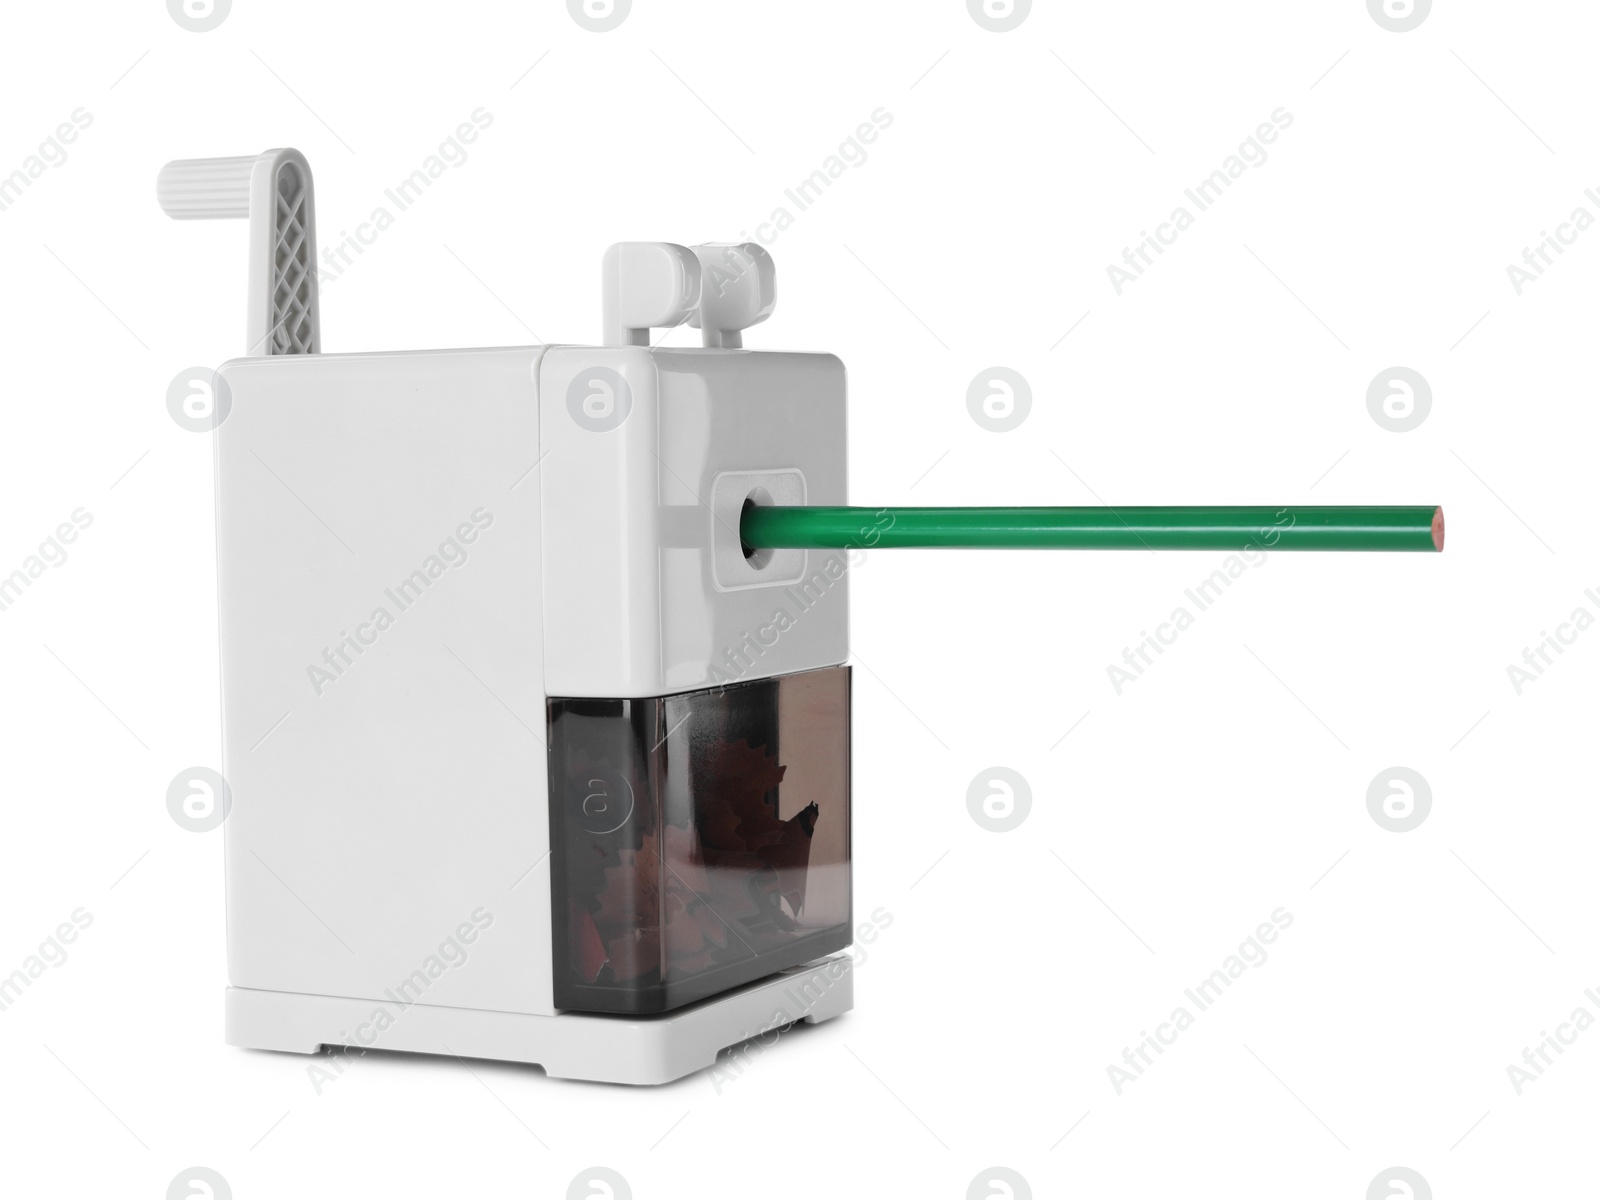 Photo of Mechanical rotary sharpener with pencil isolated on white